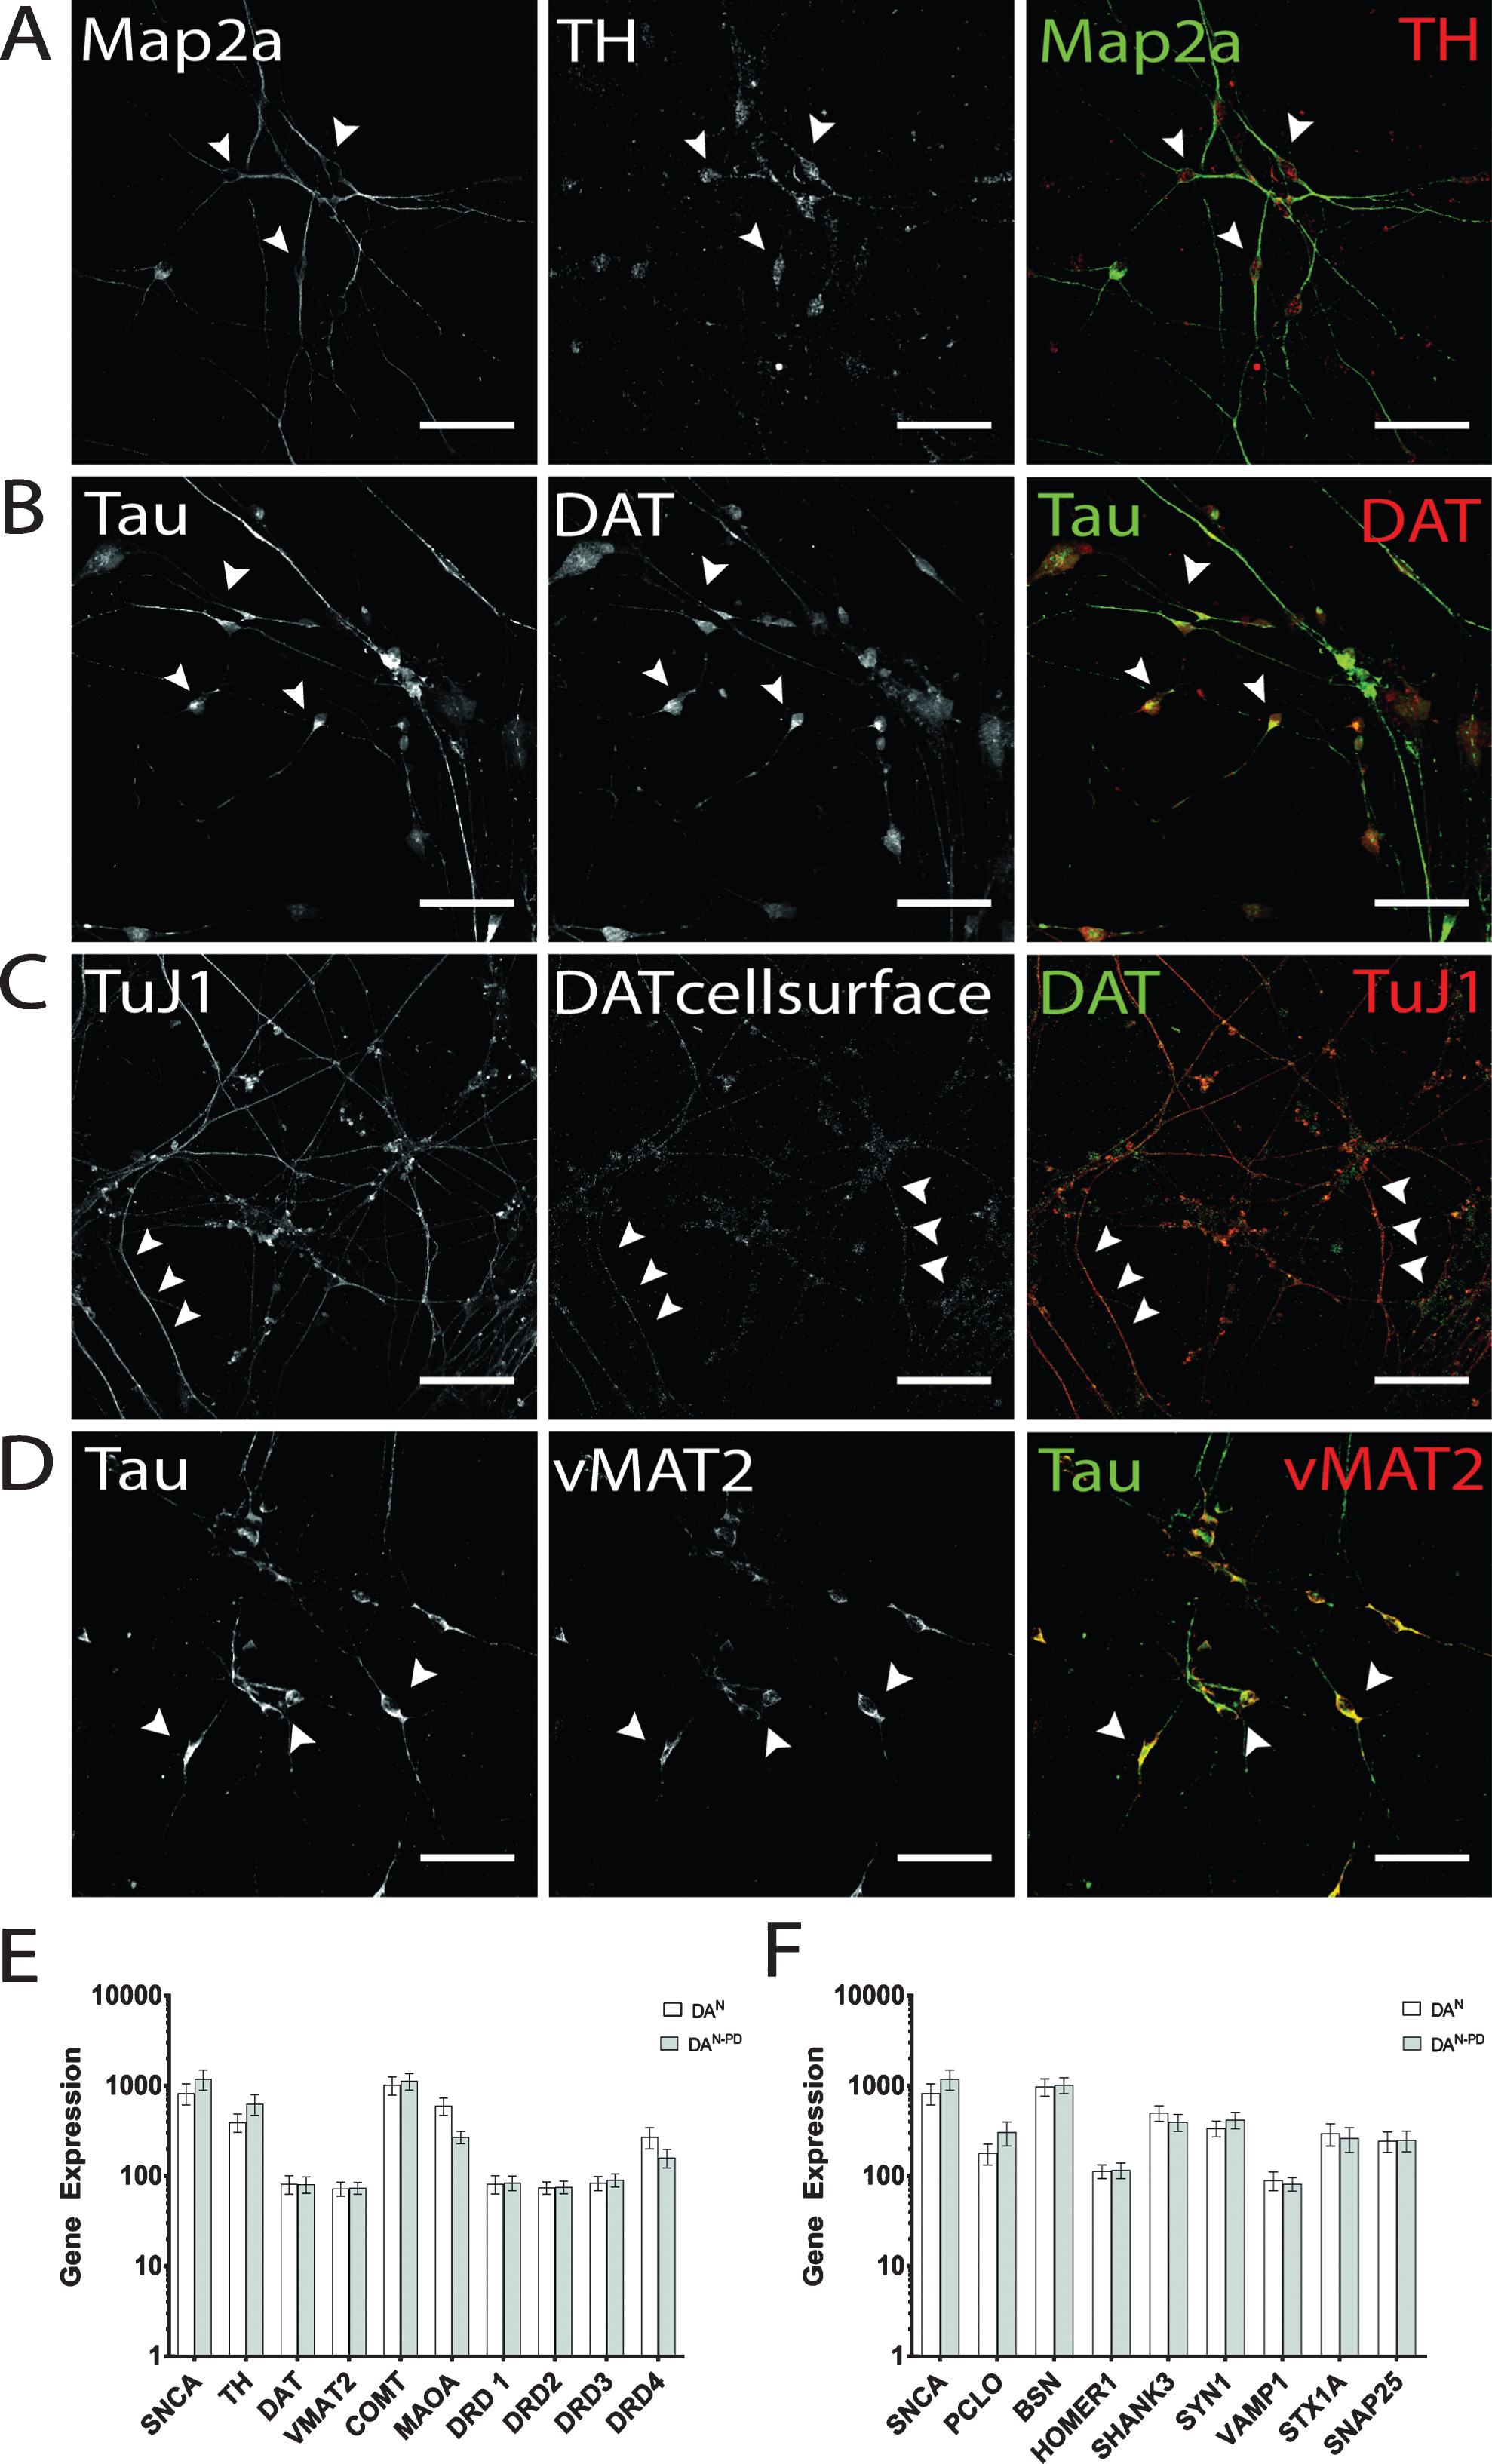 Verification of dopaminergic identity. Exemplary images of terminally differentiated hiPS cell-derived DA neurons on d50 are shown. (A) Expression of rate-limiting enzyme for DA synthesis TH. Immunostaining shows cells positive for Map2a (green) were also found to be positive for TH, with signal being mainly located in somatic areas (arrow heads), but also present in neurites. (B, C) As for TH, DAT expression could be verified by immunocytochemistry. For intracellular DAT molecules (B), dense immunosignals were found in perinuclear regions and on neurites. Cell surface-located DAT was especially present on neurites (C) and displayed more granular immunosignals compared to whole cell staining patterns. (D) Exemplary immunofluorescence images for vMAT2. Scale bar: 50μm. (E) Gene expression analysis of genes encoding for alpha-synuclein (SNCA) and DA signaling (TH, DAT, VMAT2, catechol-O-methyltransferase (COMT), monoamino oxidase A (MAOA), dopamine receptors D1-D4 (DRD1-DRD4). (F) Gene expression analysis of genes encoding for alpha-synuclein (SNCA) and presynaptic scaffolding proteins Piccolo (PCLO), Bassoon (BSN), postsynaptic scaffolding proteins Homer1 and Shank3, and the synaptic vesicle-associated proteins Synapsin 1 (SYN1), Synaptobrevin-1 (VAMP1), Syntaxin 1A (STX1A), and SNAP25.